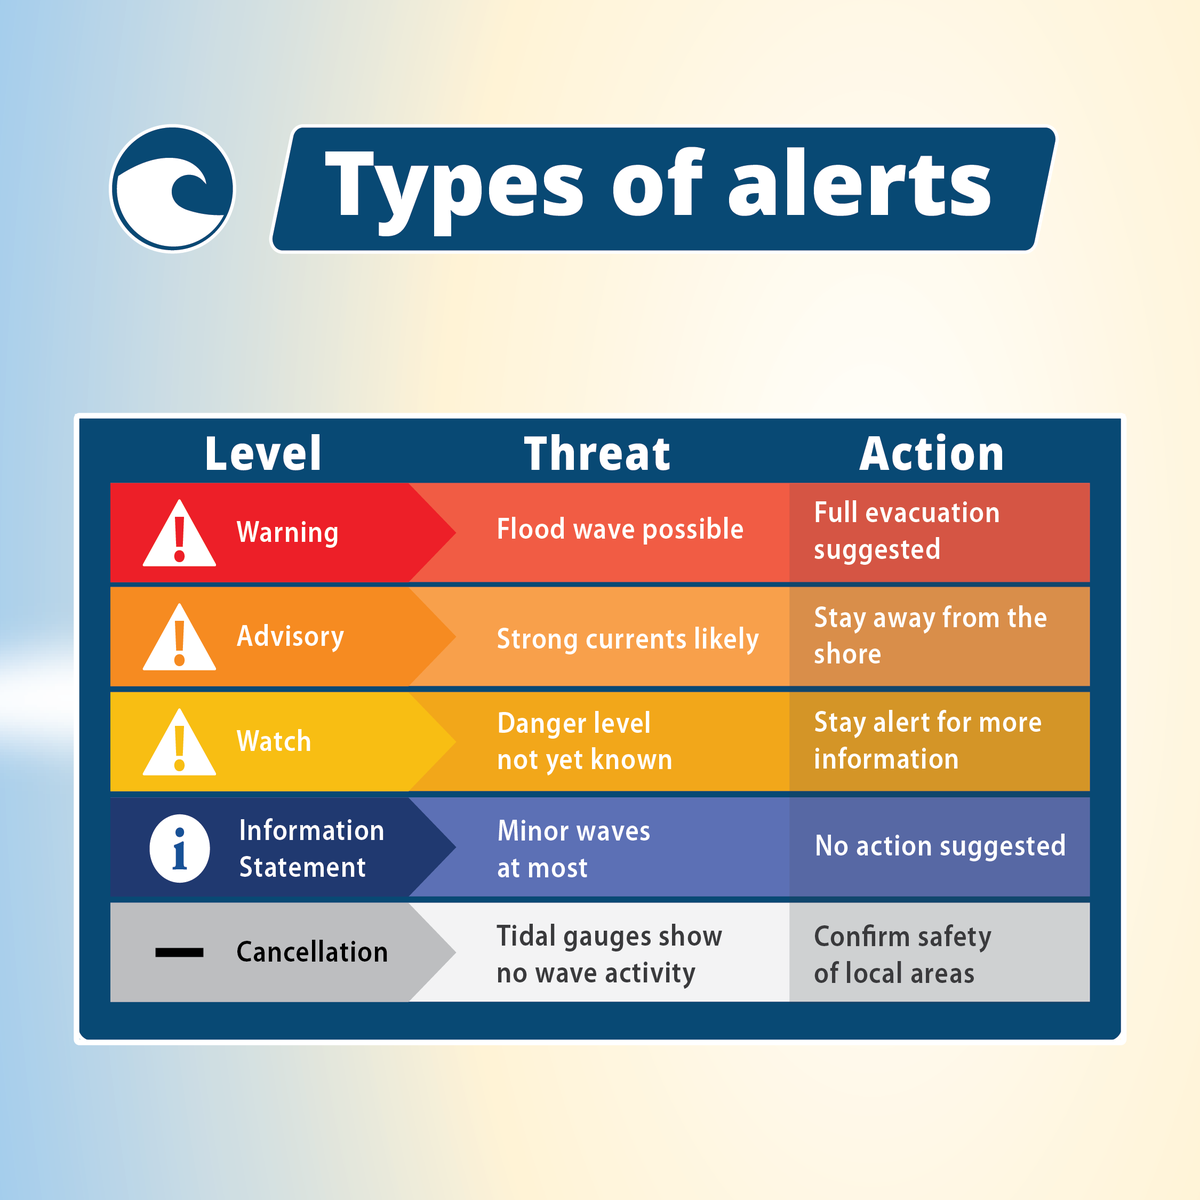 Did you know there are different levels of tsunami alerts? 🌊 Alerts are issued by the National Tsunami Warning Center. Learn what these alerts mean & what actions to take for each: PreparedBC.ca/tsunamis 👈